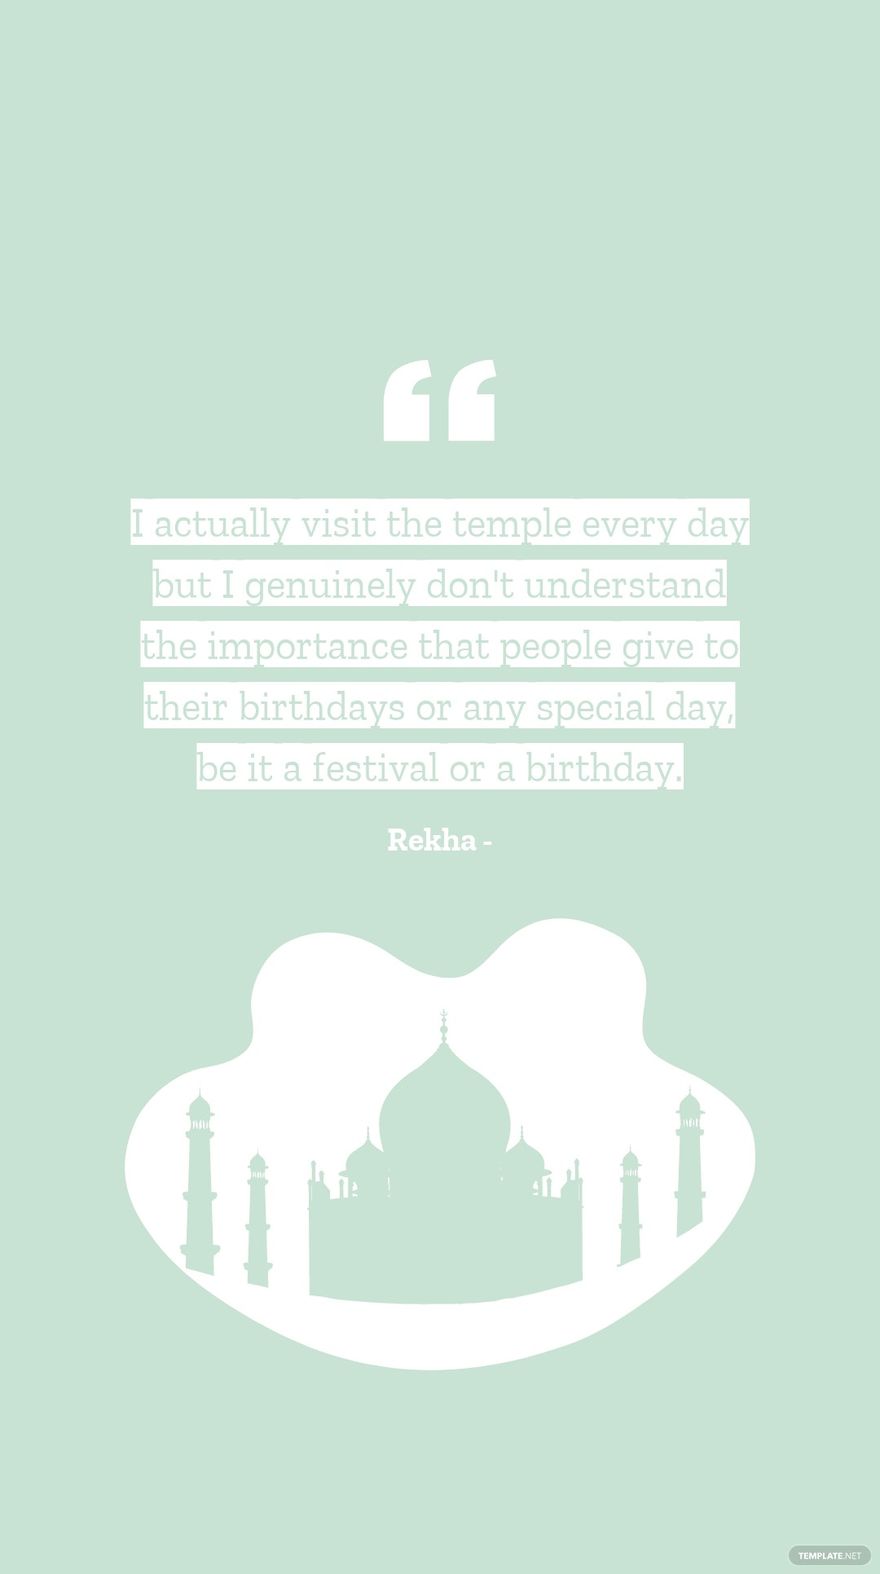 Rekha - I actually visit the temple every day but I genuinely don't understand the importance that people give to their birthdays or any special day, be it a festival or a birthday.